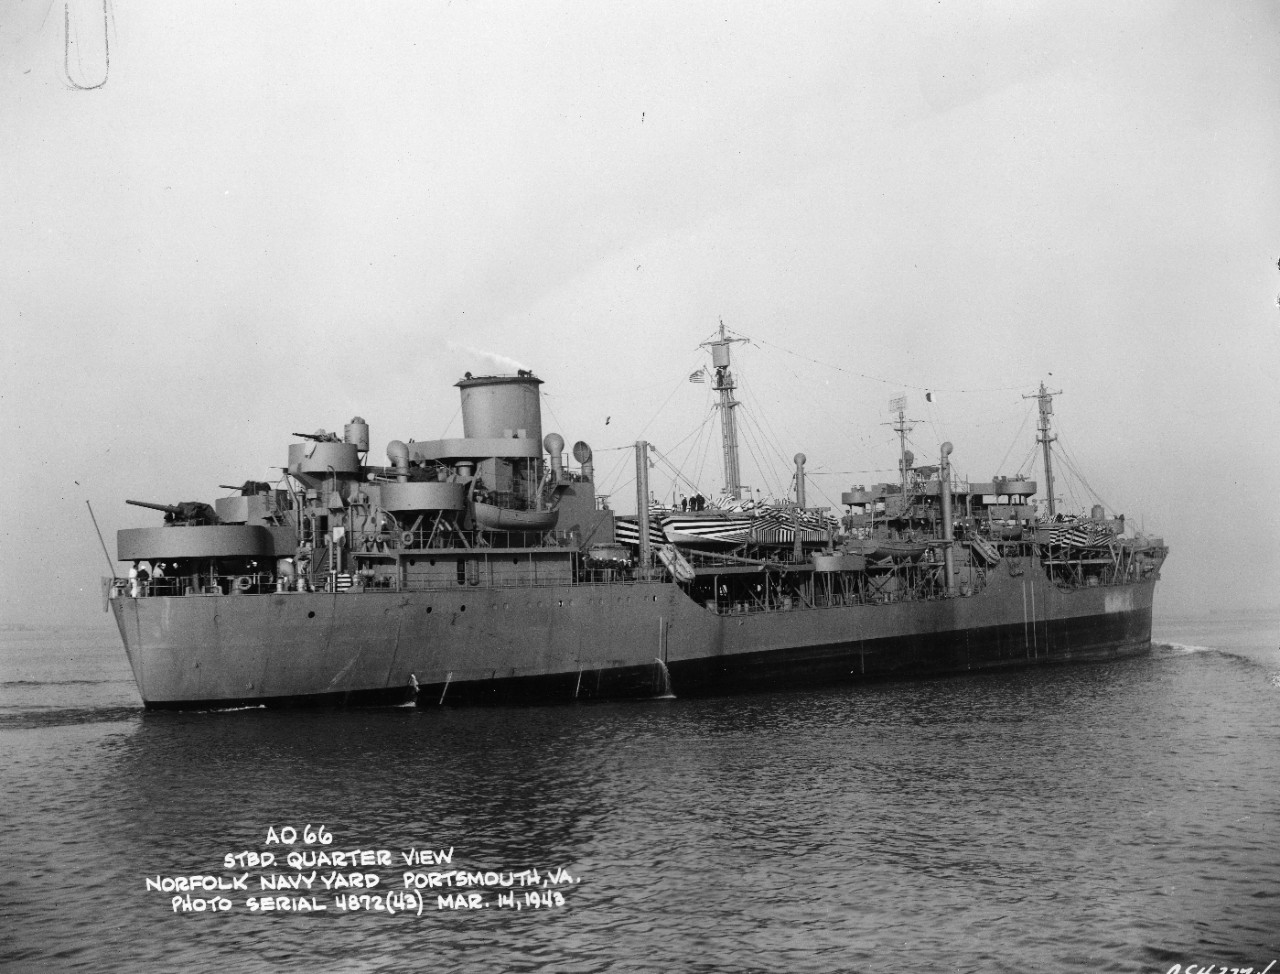 Starboard bow view of USS Atascosa (AO-66) underway in light load condition with camouflaged PT boats as deck cargo fore and aft off the Norfolk Navy Yard, Portsmouth, VA, on 14 March 1943. She was the former S.S. Esso Columbia. Note the lines at her bow. She seems to be streaming paravanes.